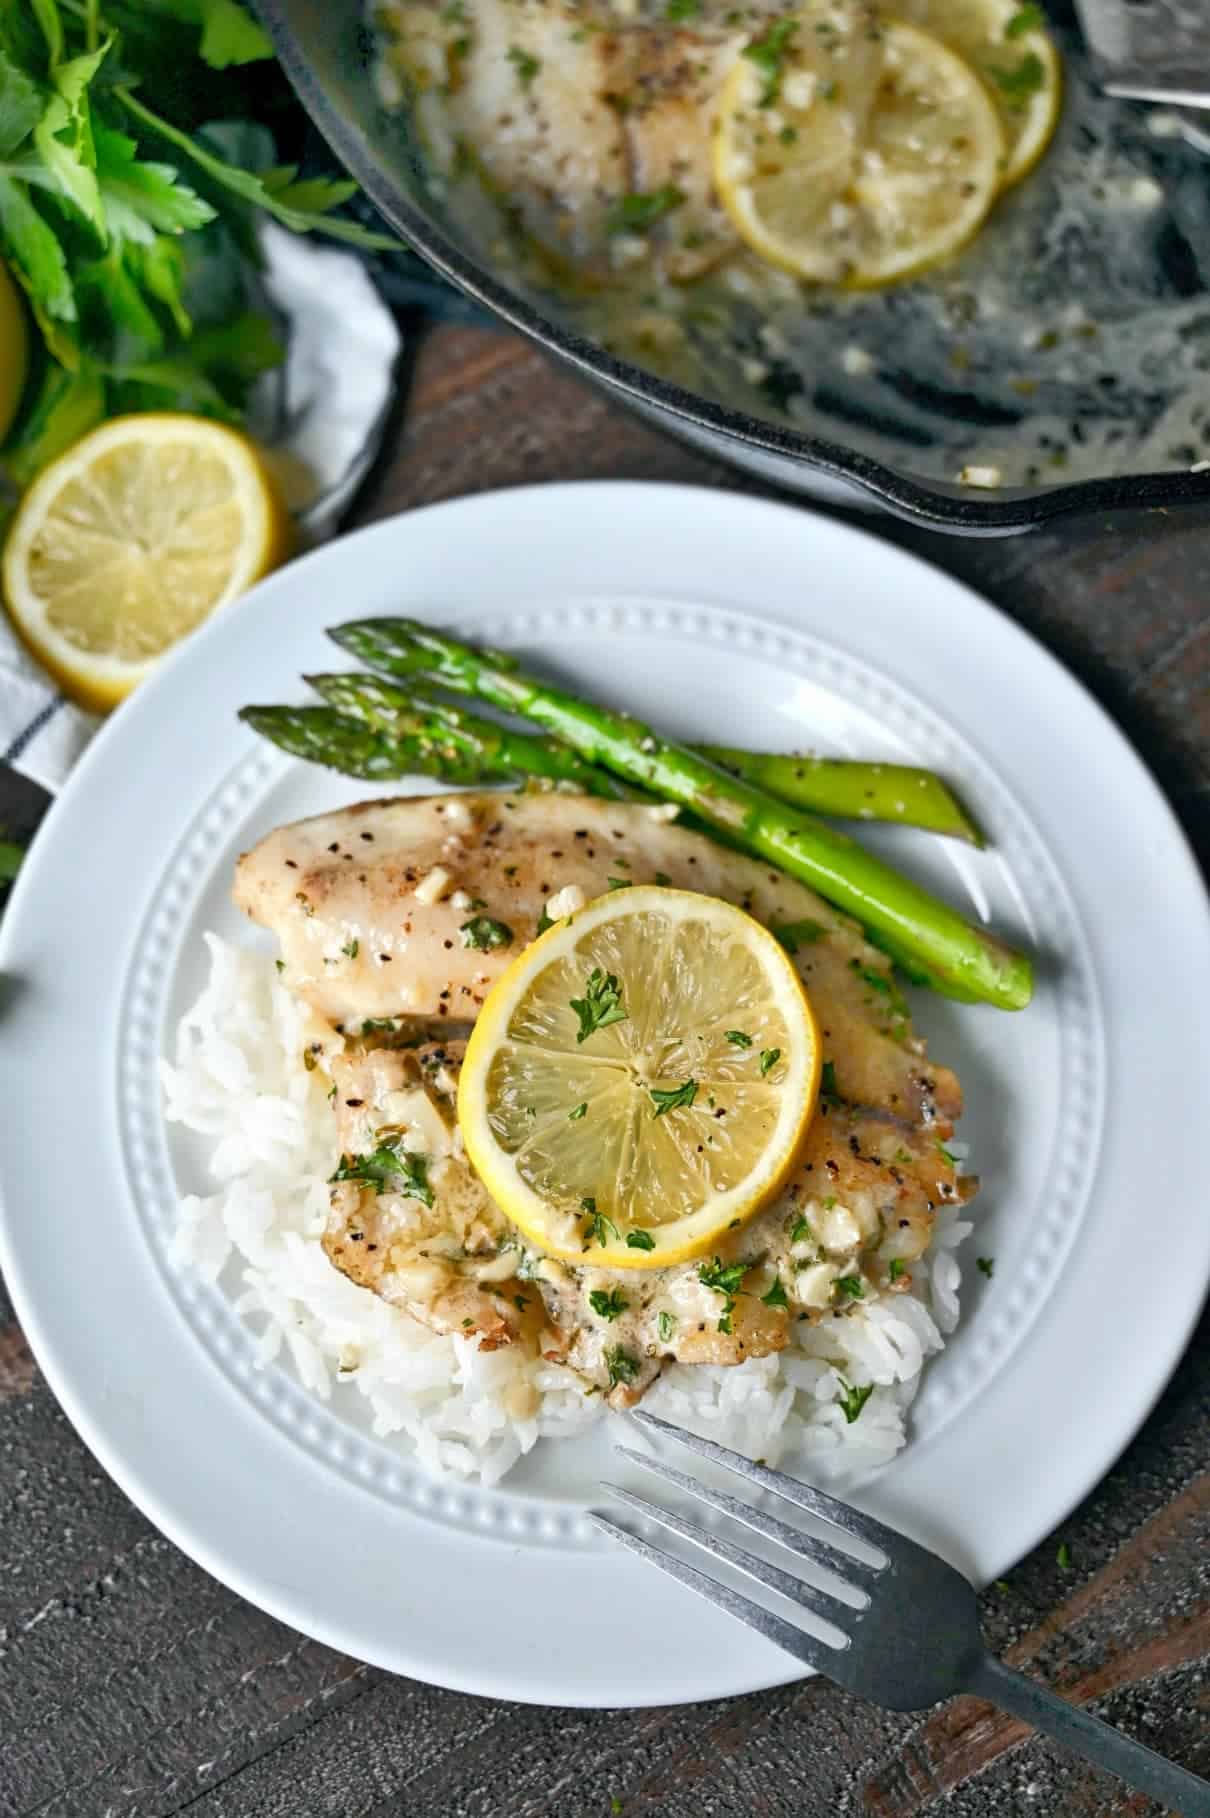 Pan seared tilapia on a bed of white rice with roasted asparagus on the side.